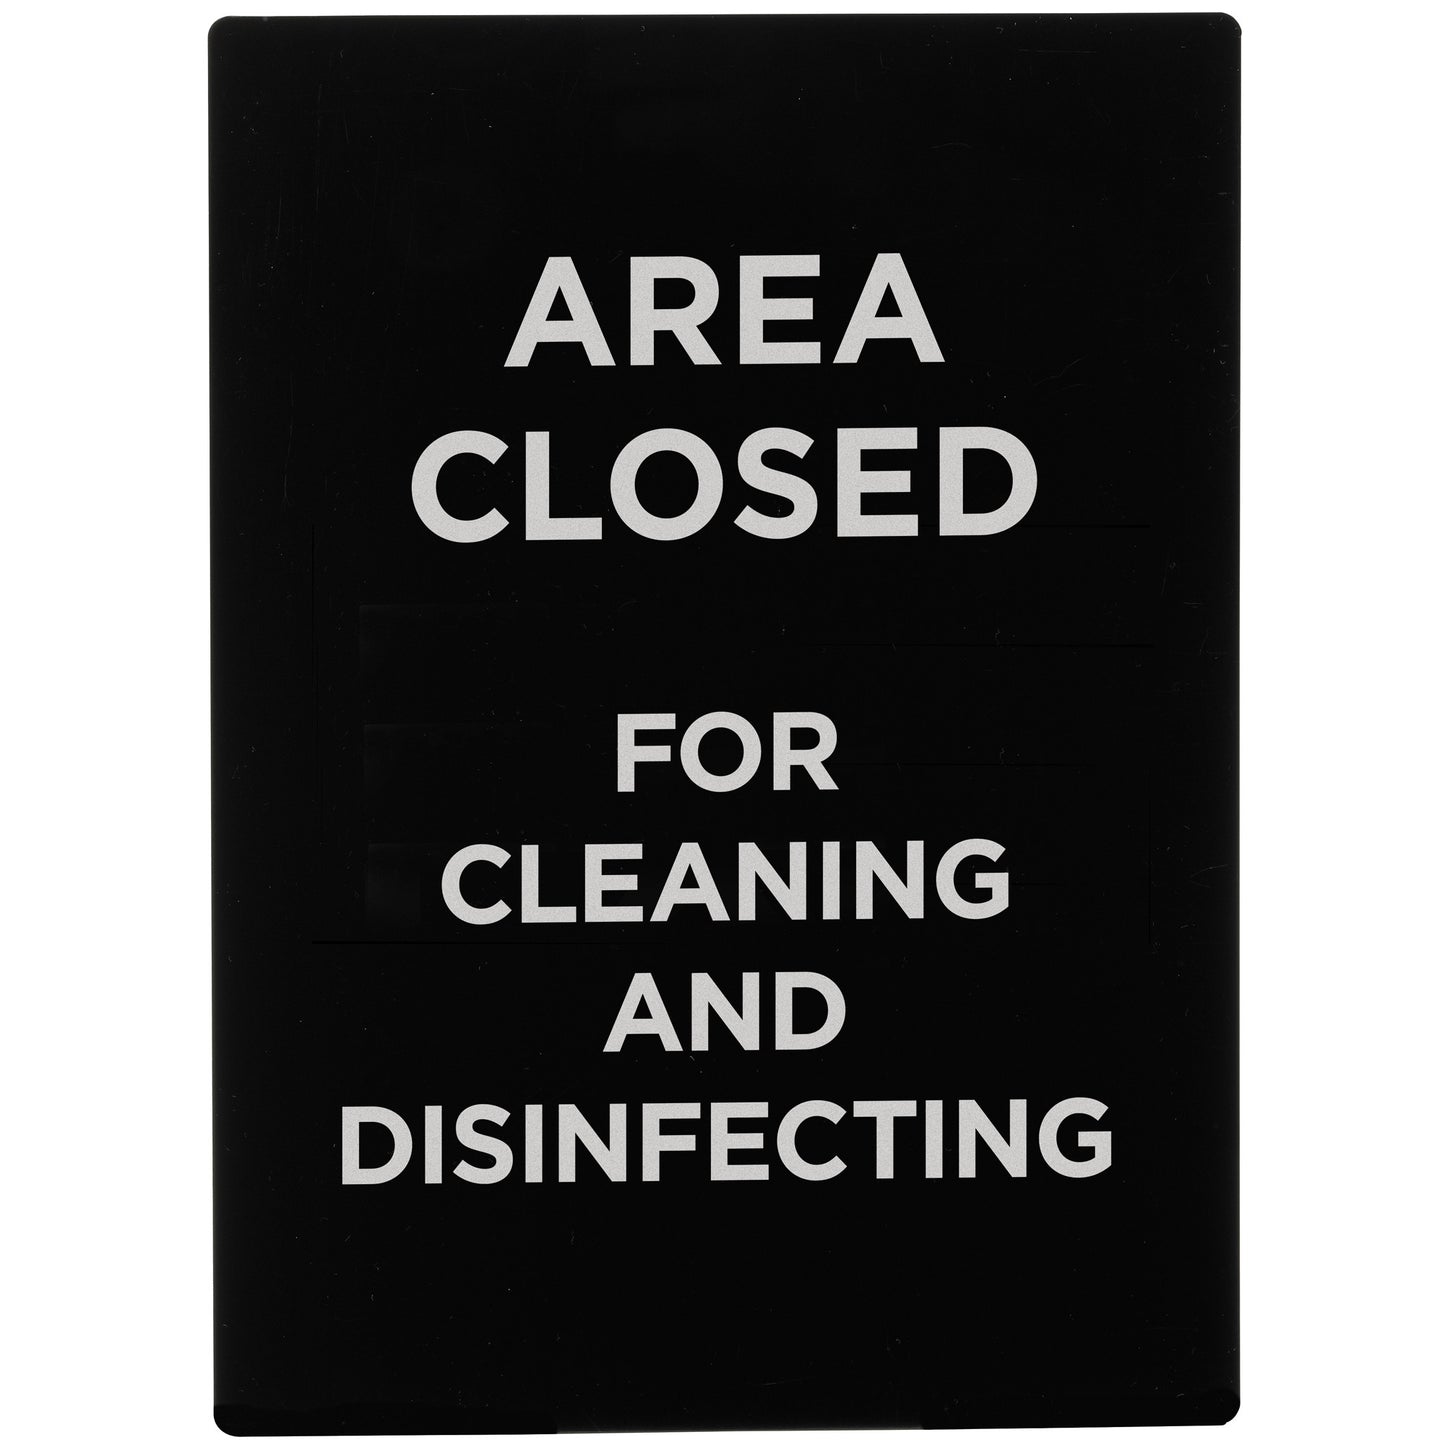 SGN-807 - Stanchion Frame Sign - SGN-807- Area Closed For Cleaning & Disinfecting